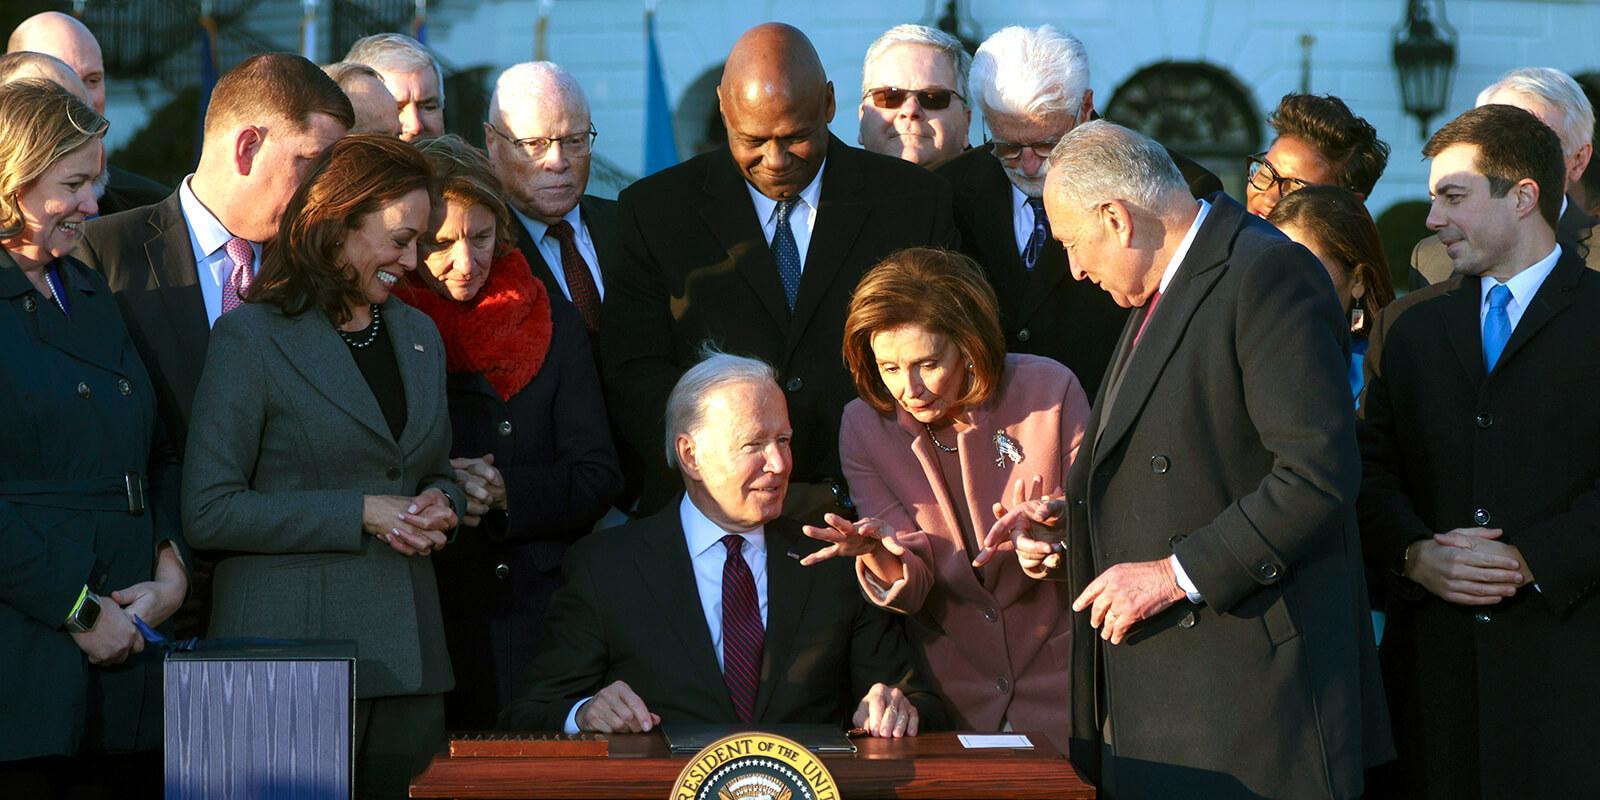 President Joe Biden signs the infrastructure bill at the White House as he is surrounded by lawmakers, Cabinet members and other allies, including AFSCME President Lee Saunders. (Photo by Alex Wong/Getty Images)